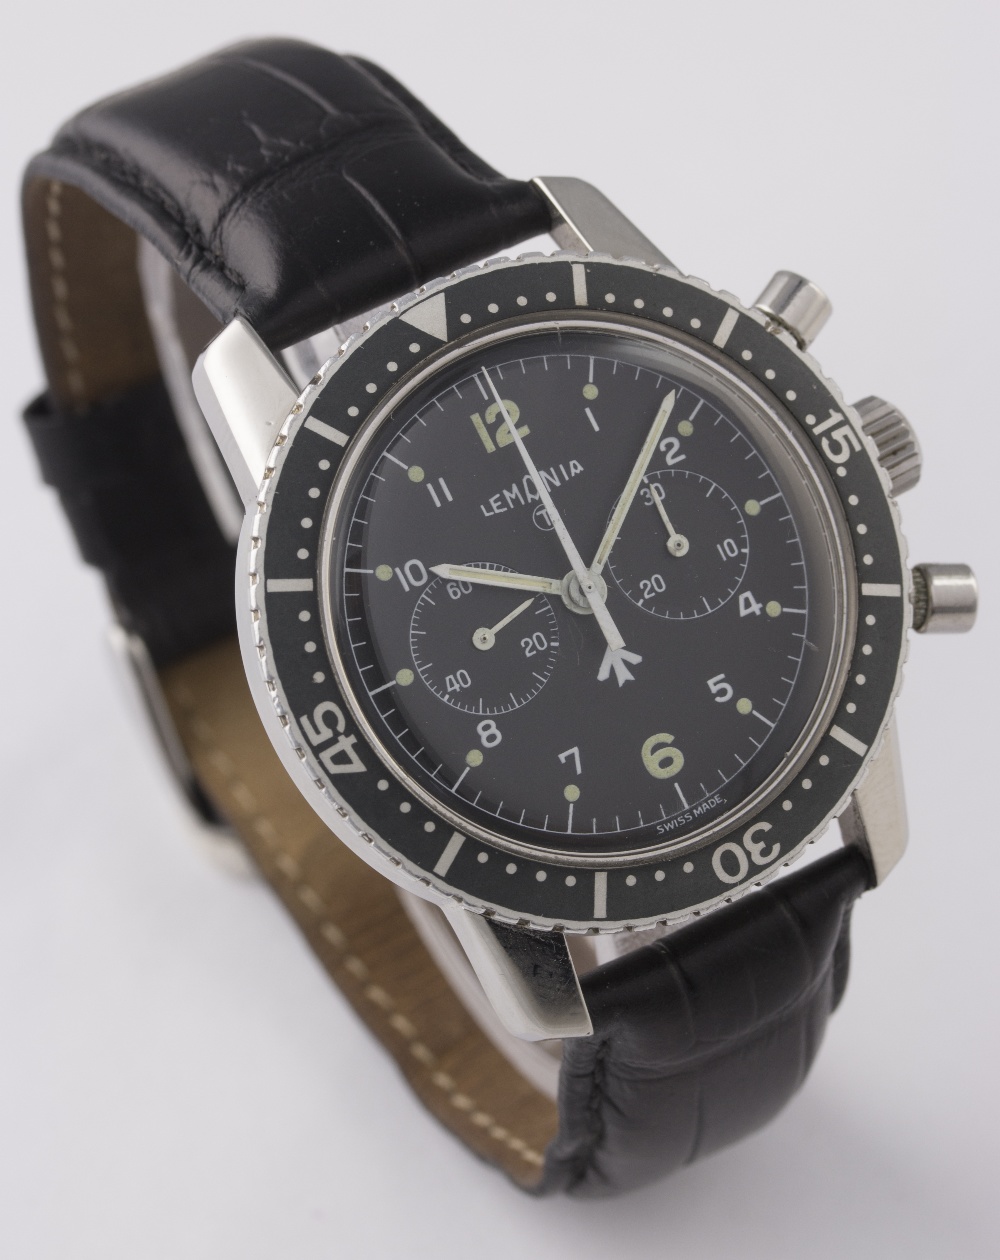 A RARE GENTLEMAN'S STAINLESS STEEL SOUTH AFRICAN AIR FORCE LEMANIA PILOTS MILITARY CHRONOGRAPH WRIST - Image 5 of 8